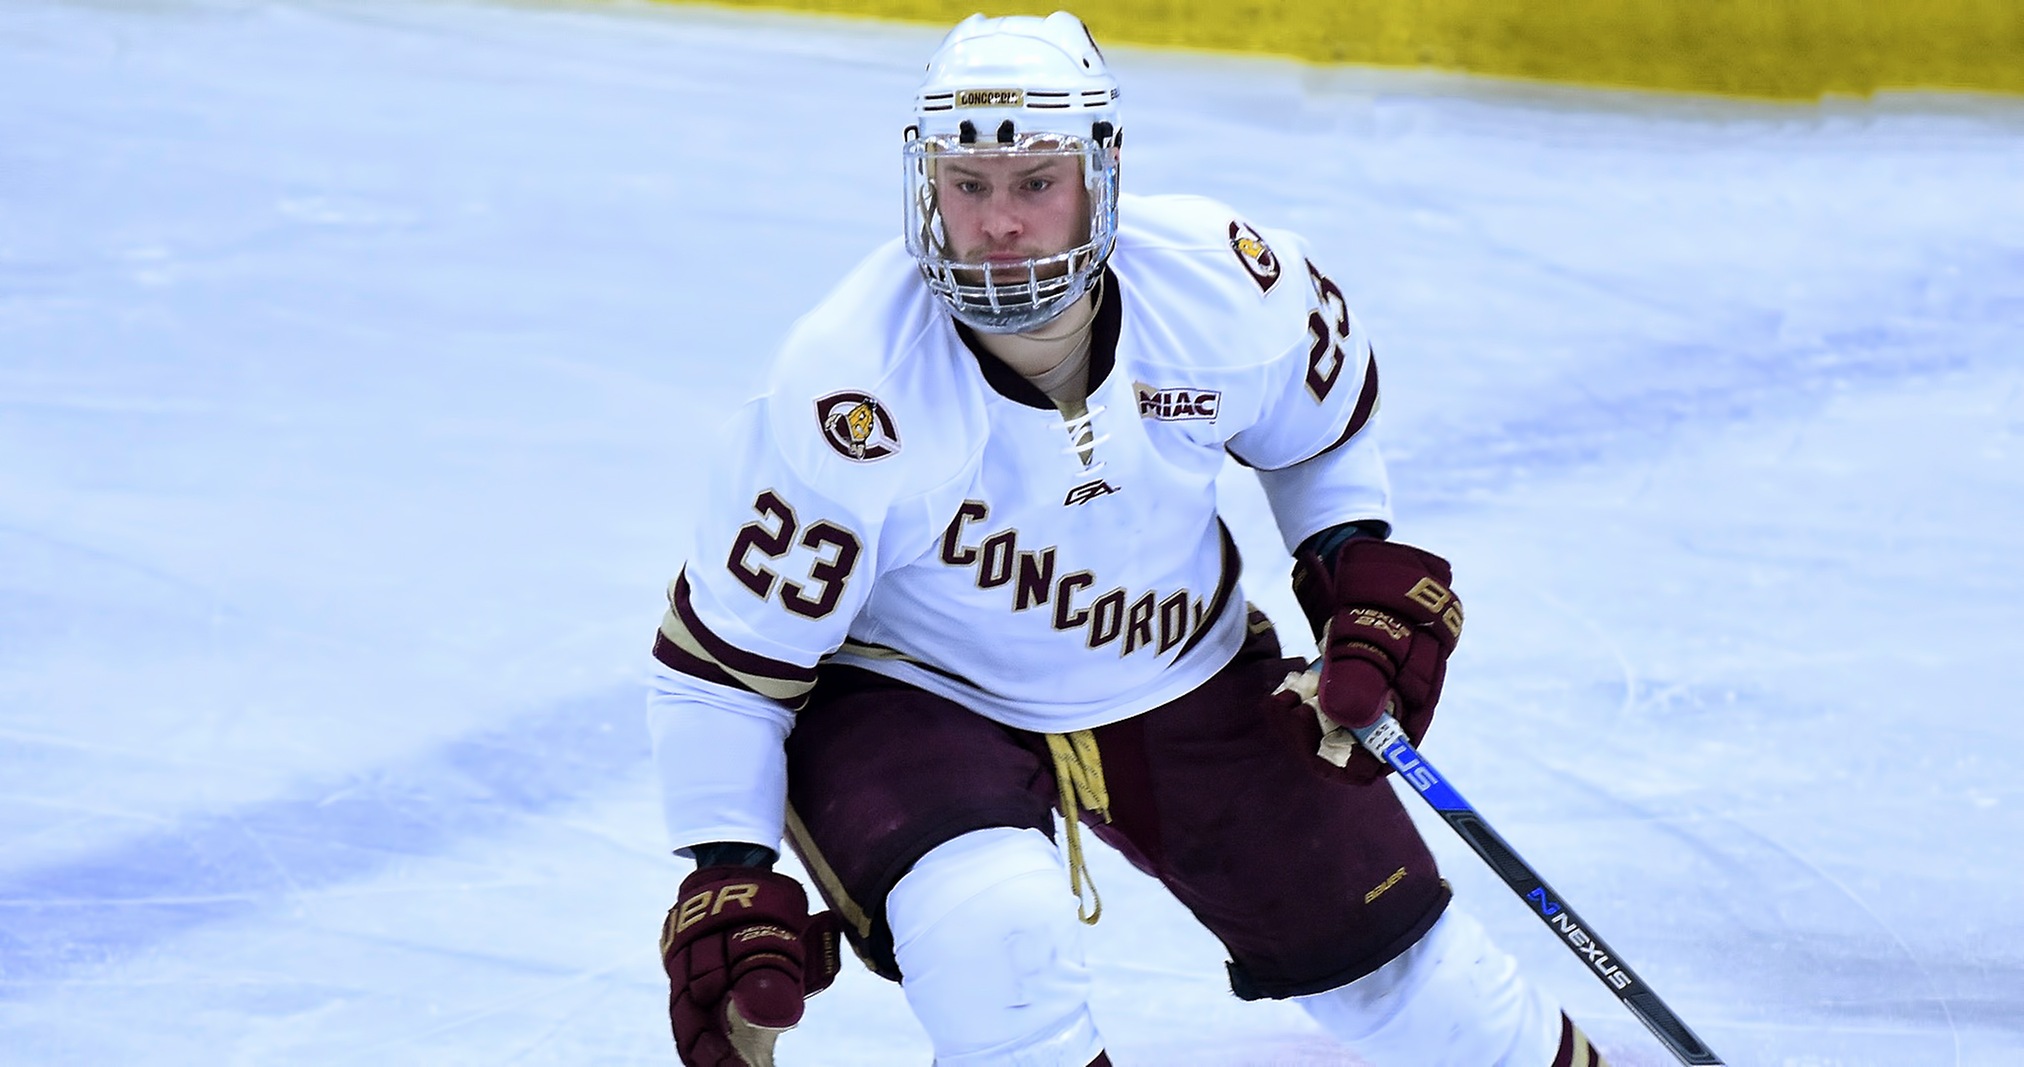 Senior Aaron Ryback scored his first collegiate goal in the Cobbers' game at Milwaukee School of Engineering.